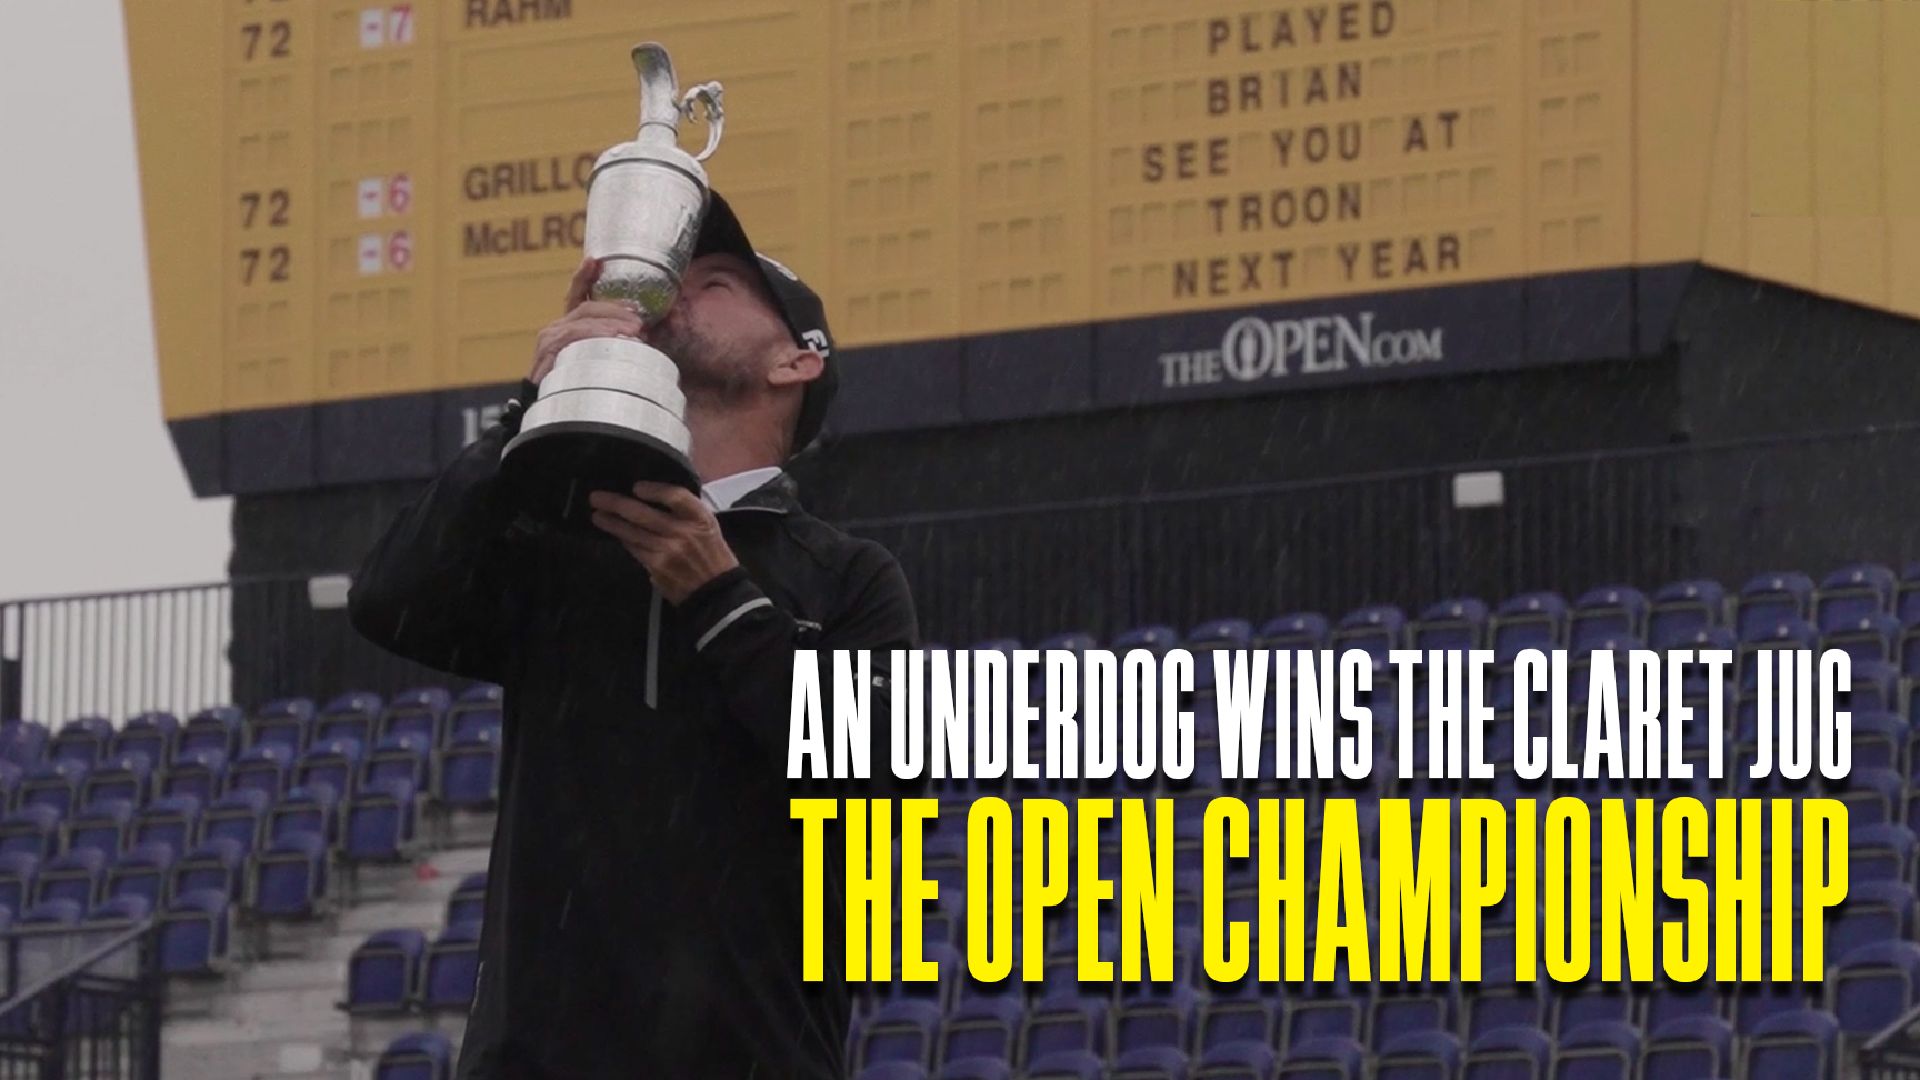 “Tiger Woods Out There” | The Open Seen & Heard | Sunday at Hoylake